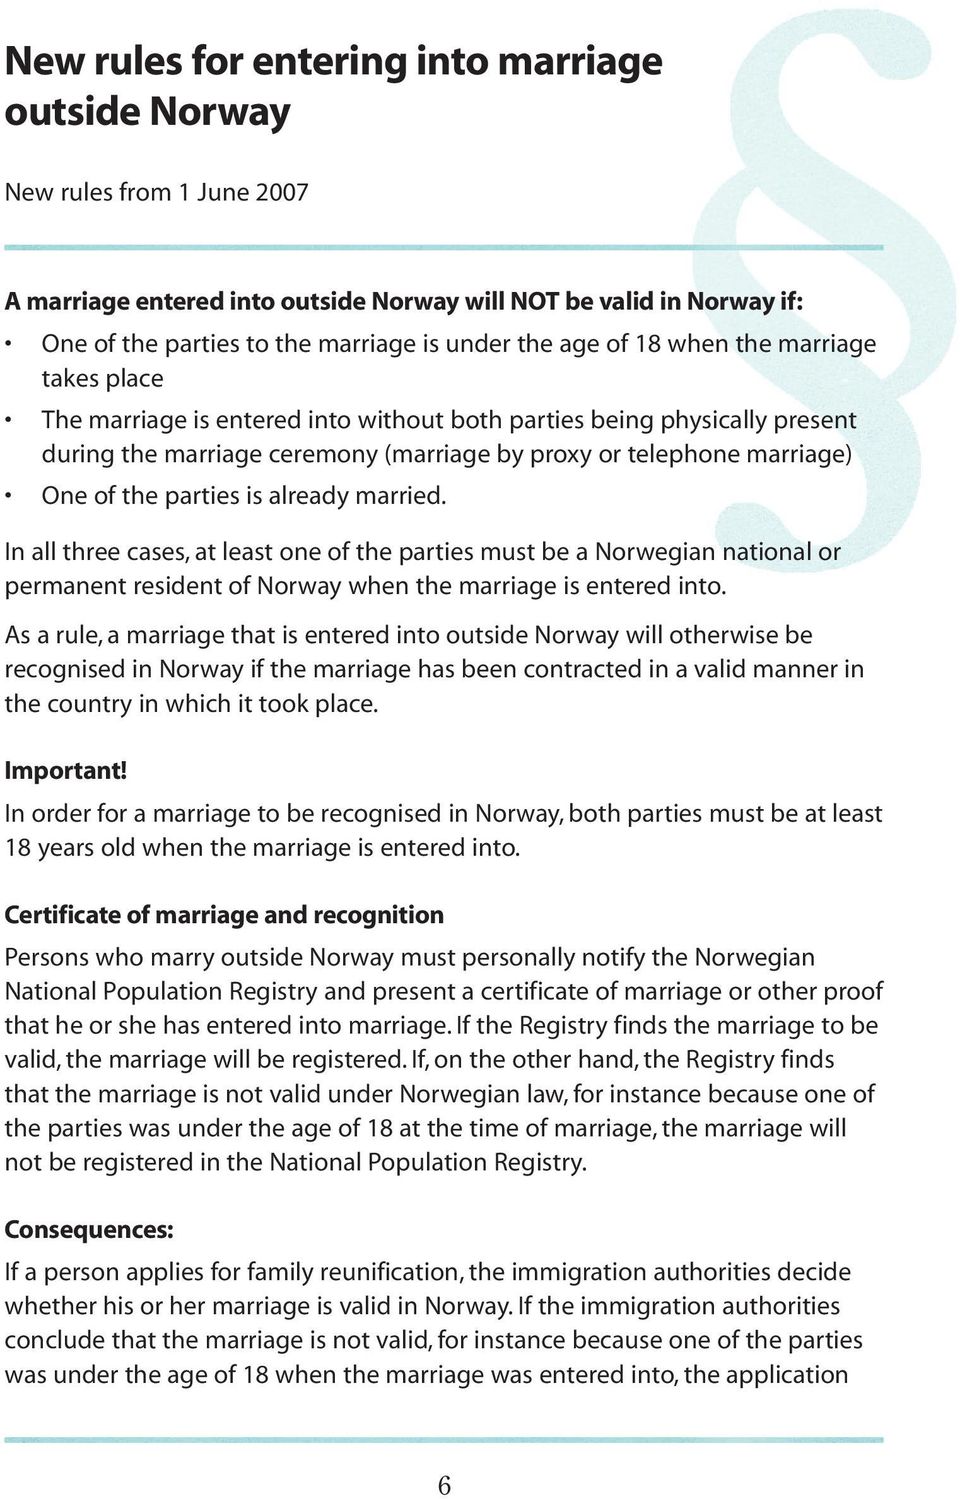 parties is already married. In all three cases, at least one of the parties must be a Norwegian national or permanent resident of Norway when the marriage is entered into.